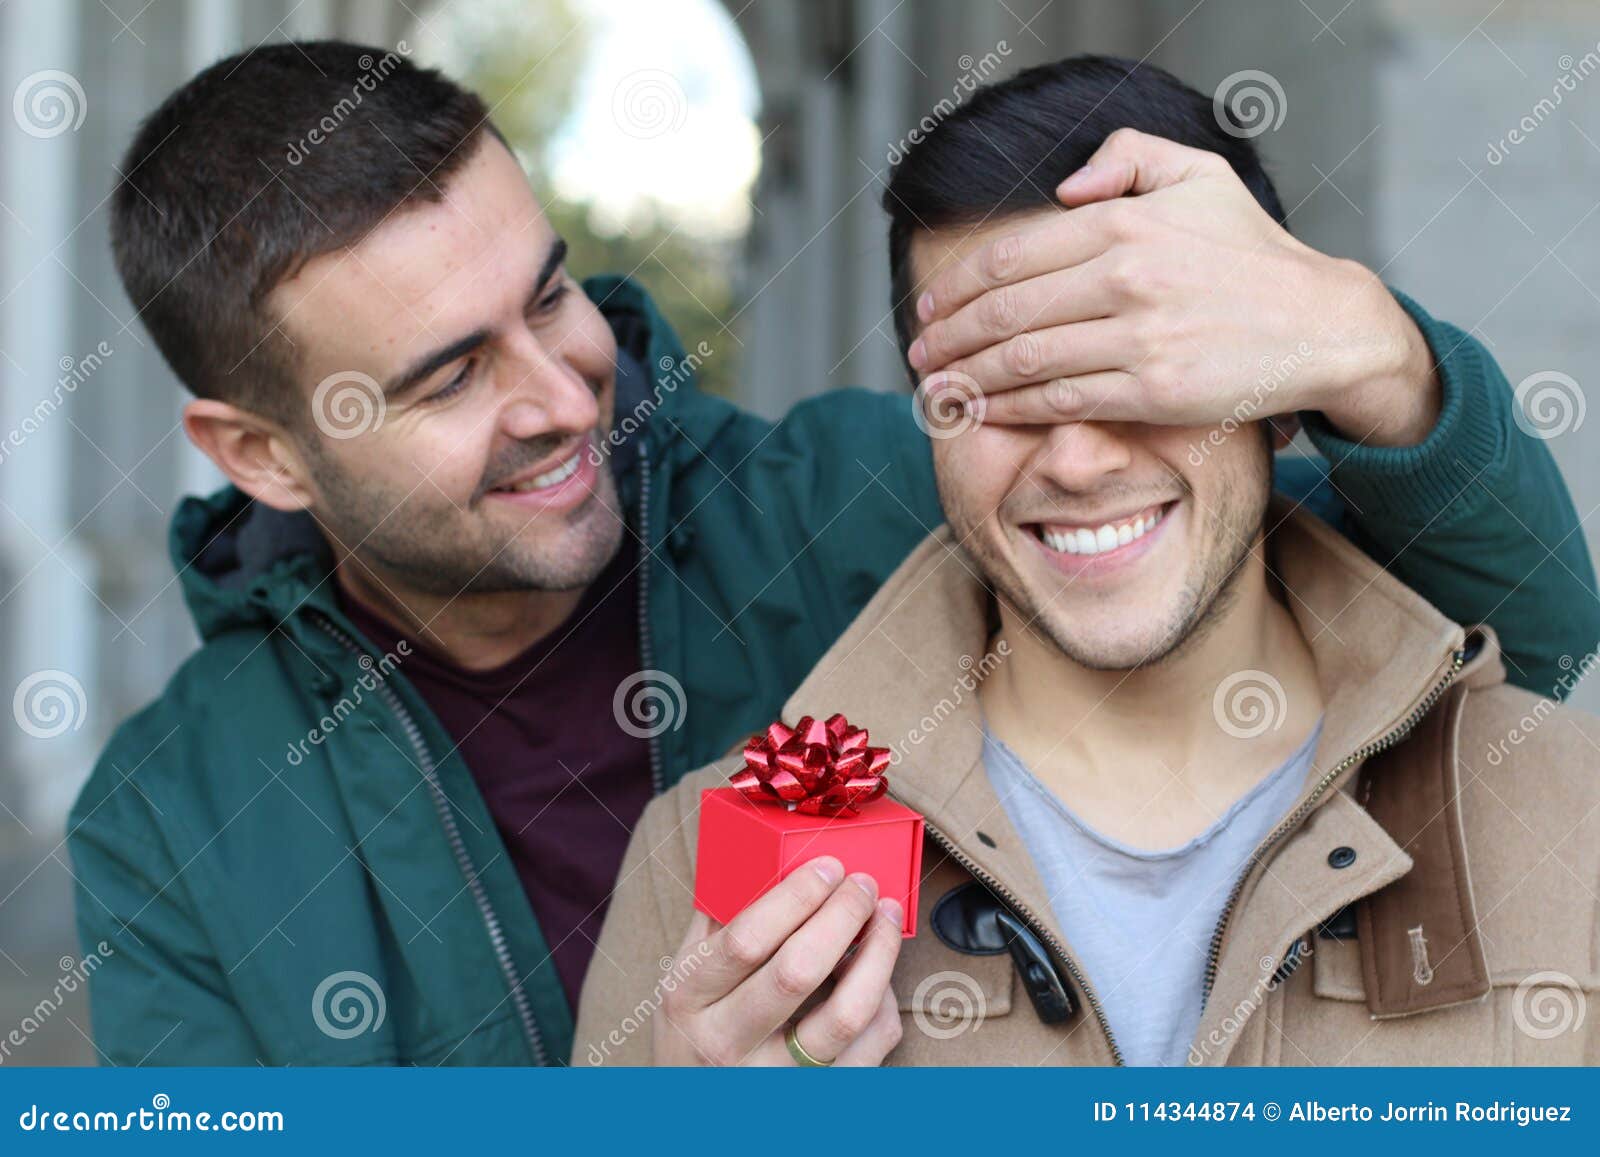 Lovely Same Sex Couple Sharing Affection Stock Photo photo photo